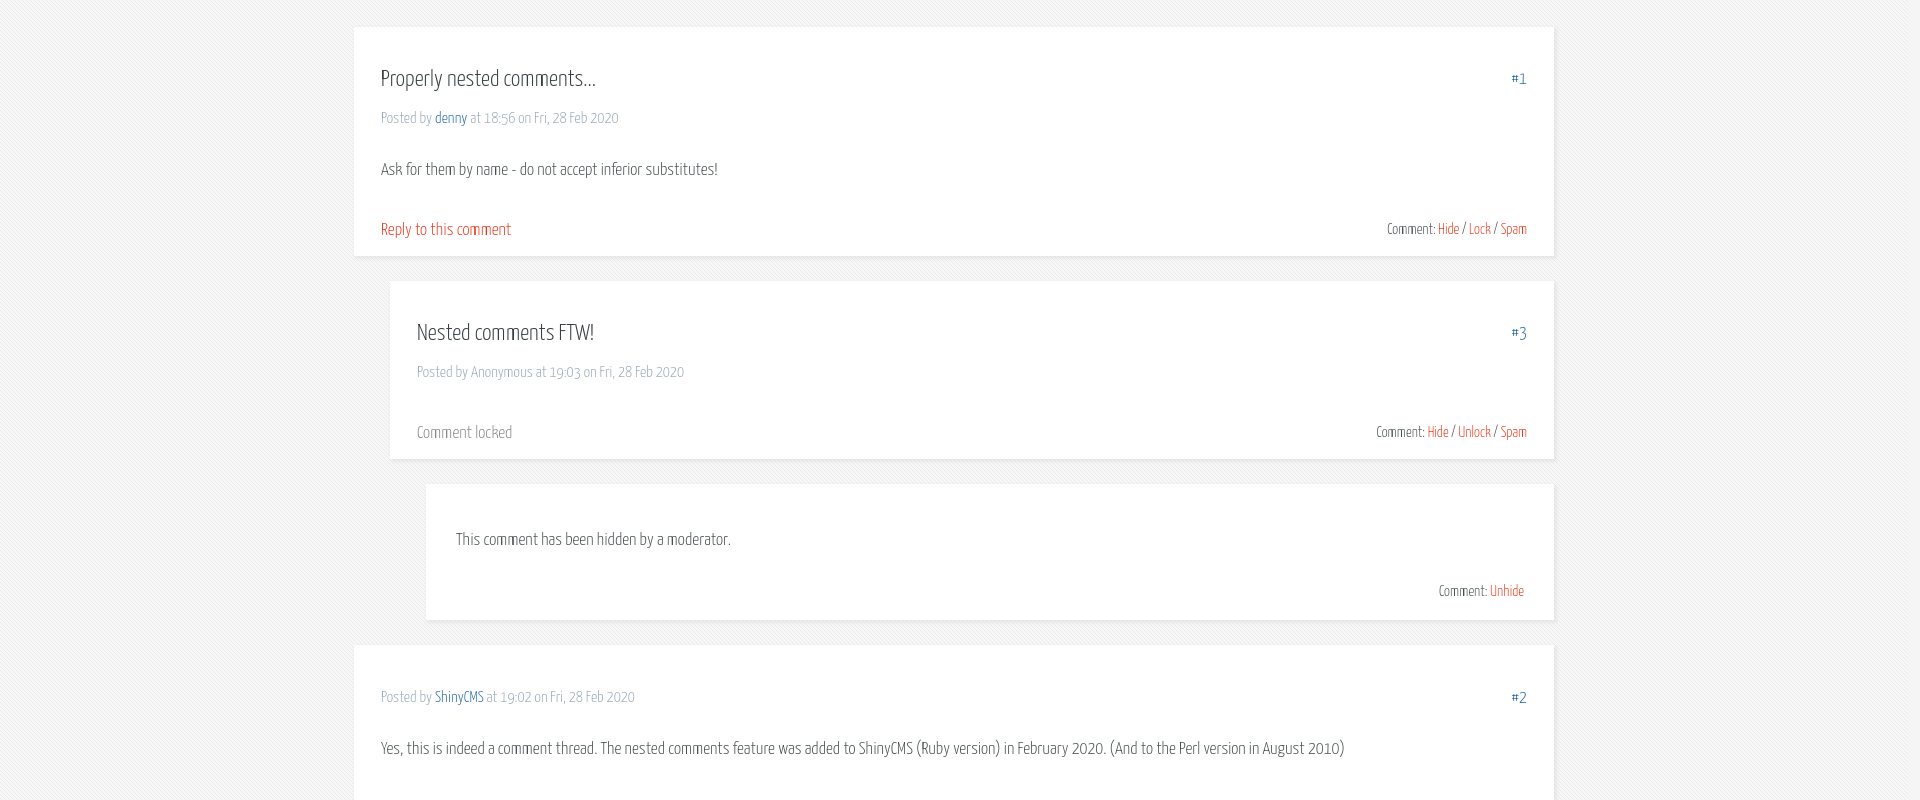 Screenshot of ShinyCMS comments feature, showing multi-level nesting